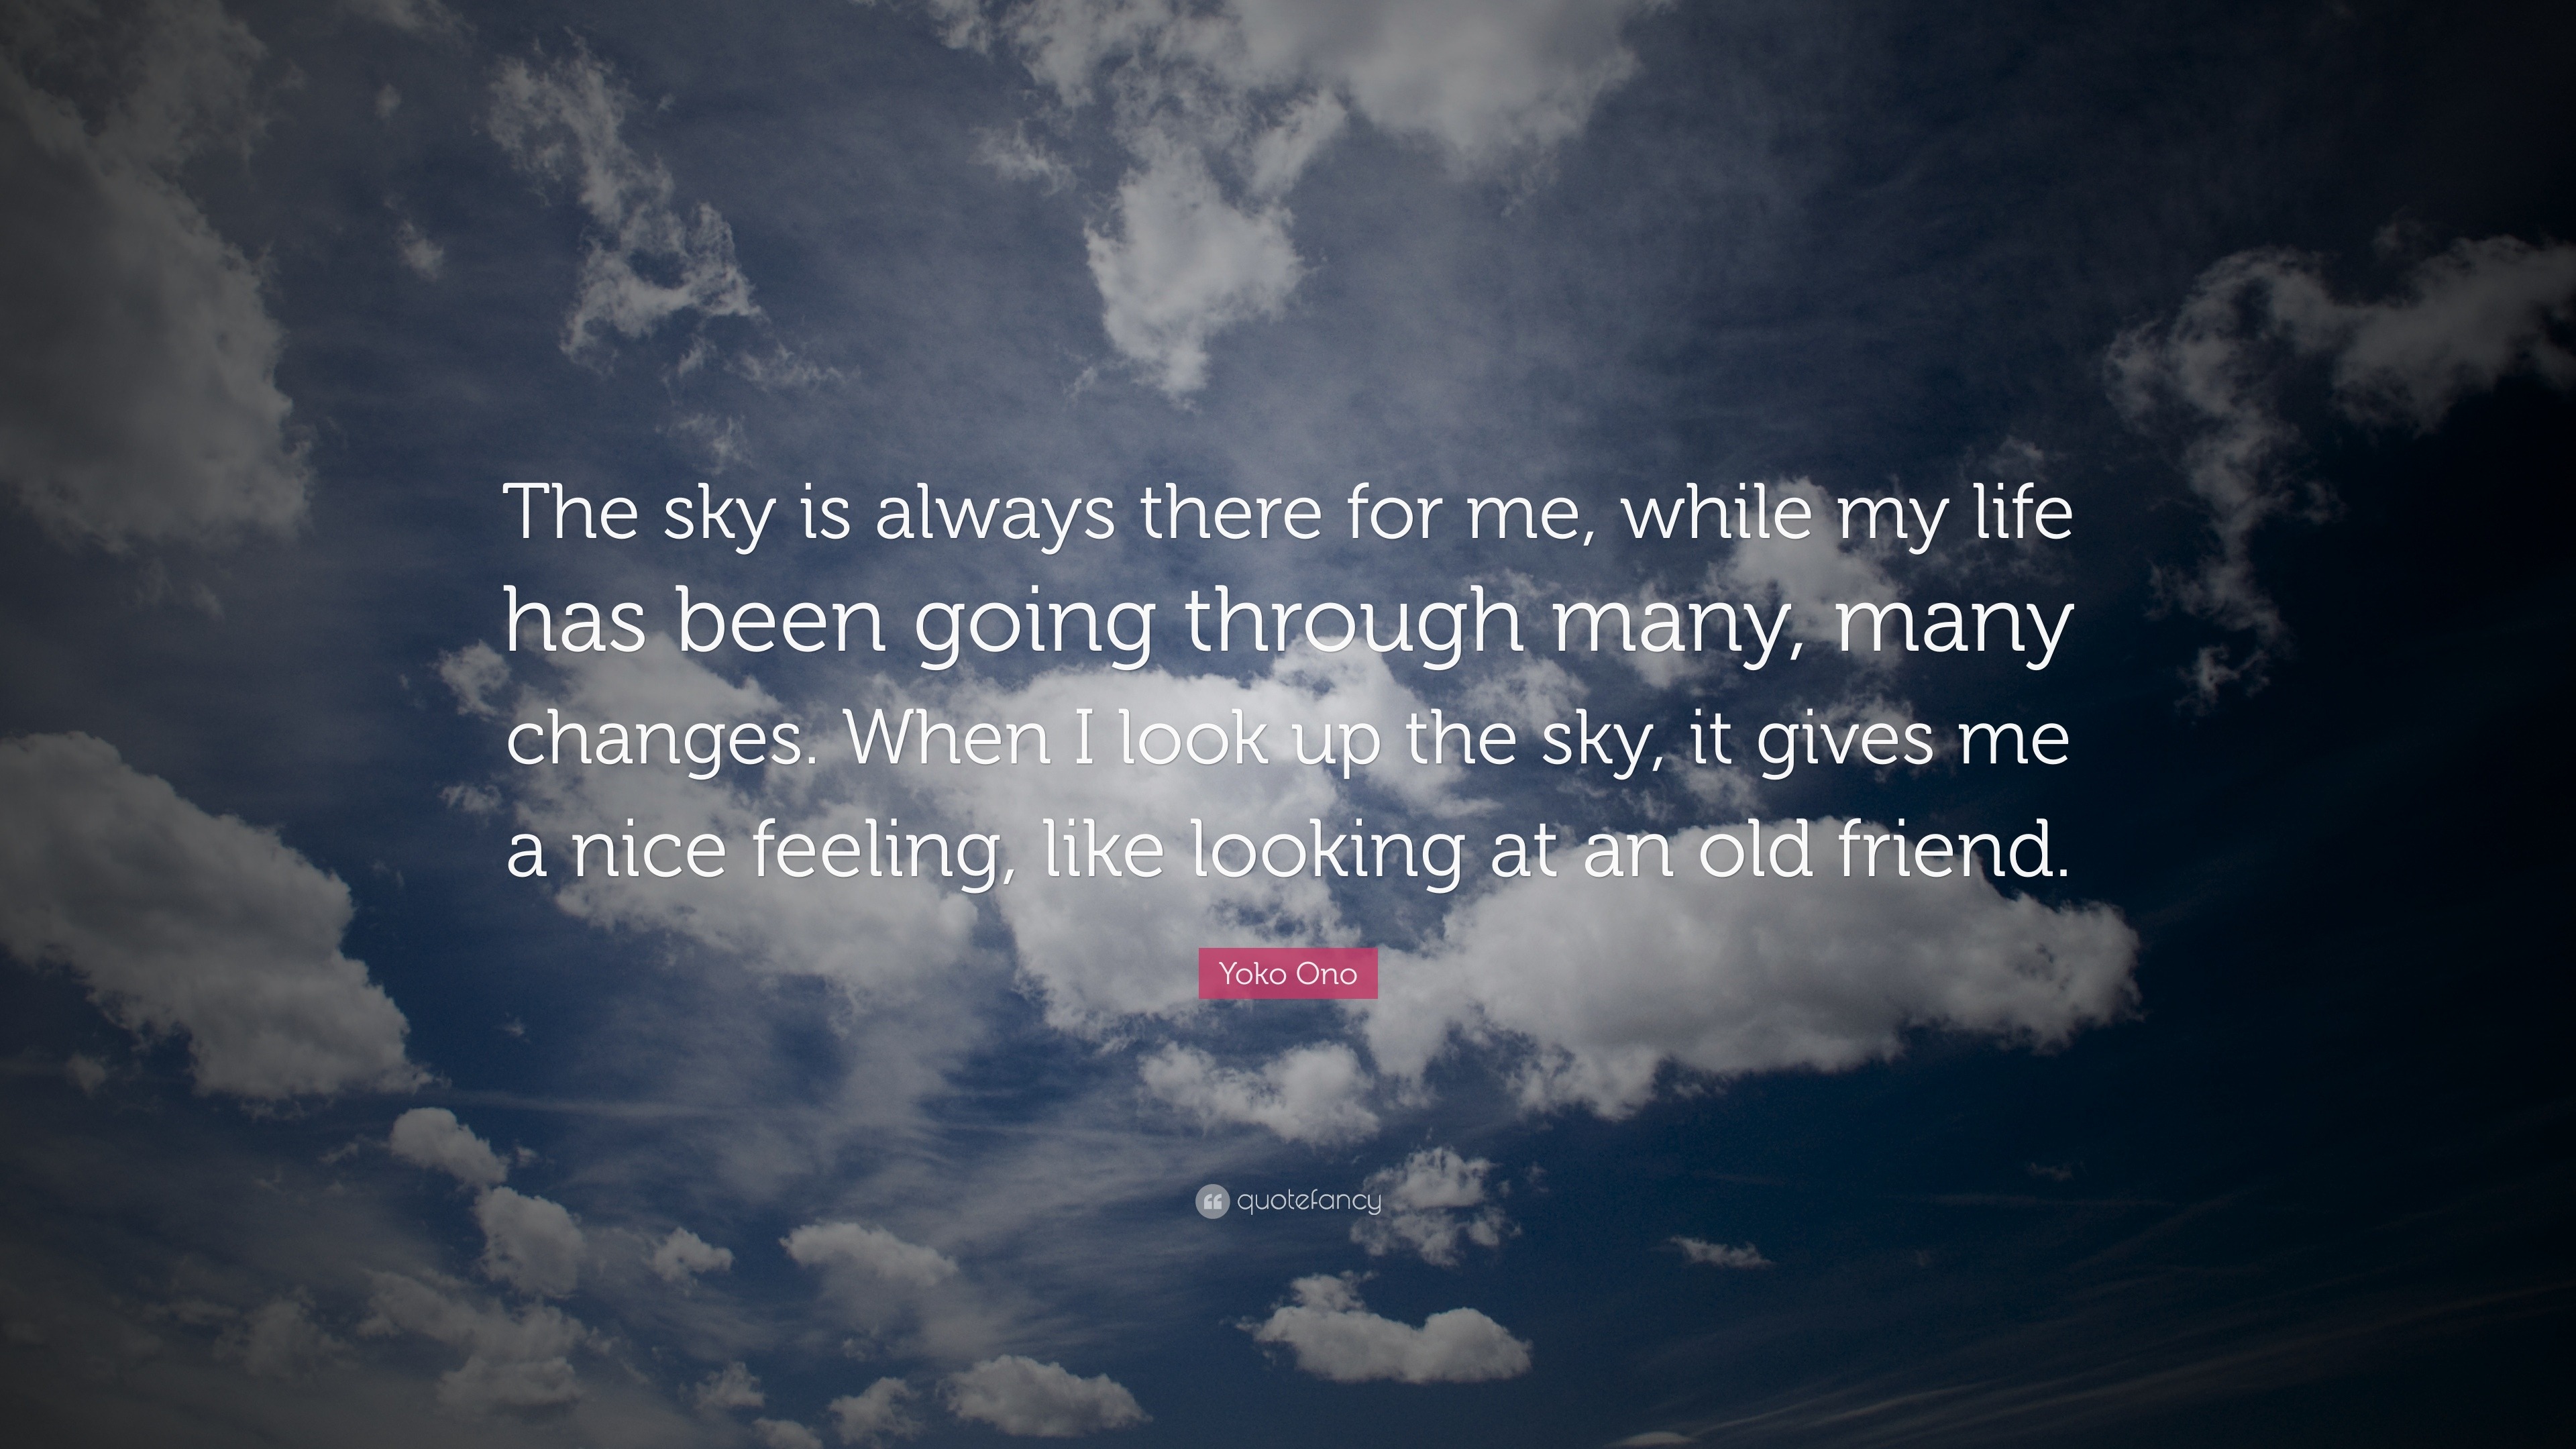 Yoko Ono Quote The Sky Is Always There For Me While My Life Has Been Going Through Many Many Changes When I Look Up The Sky It Give